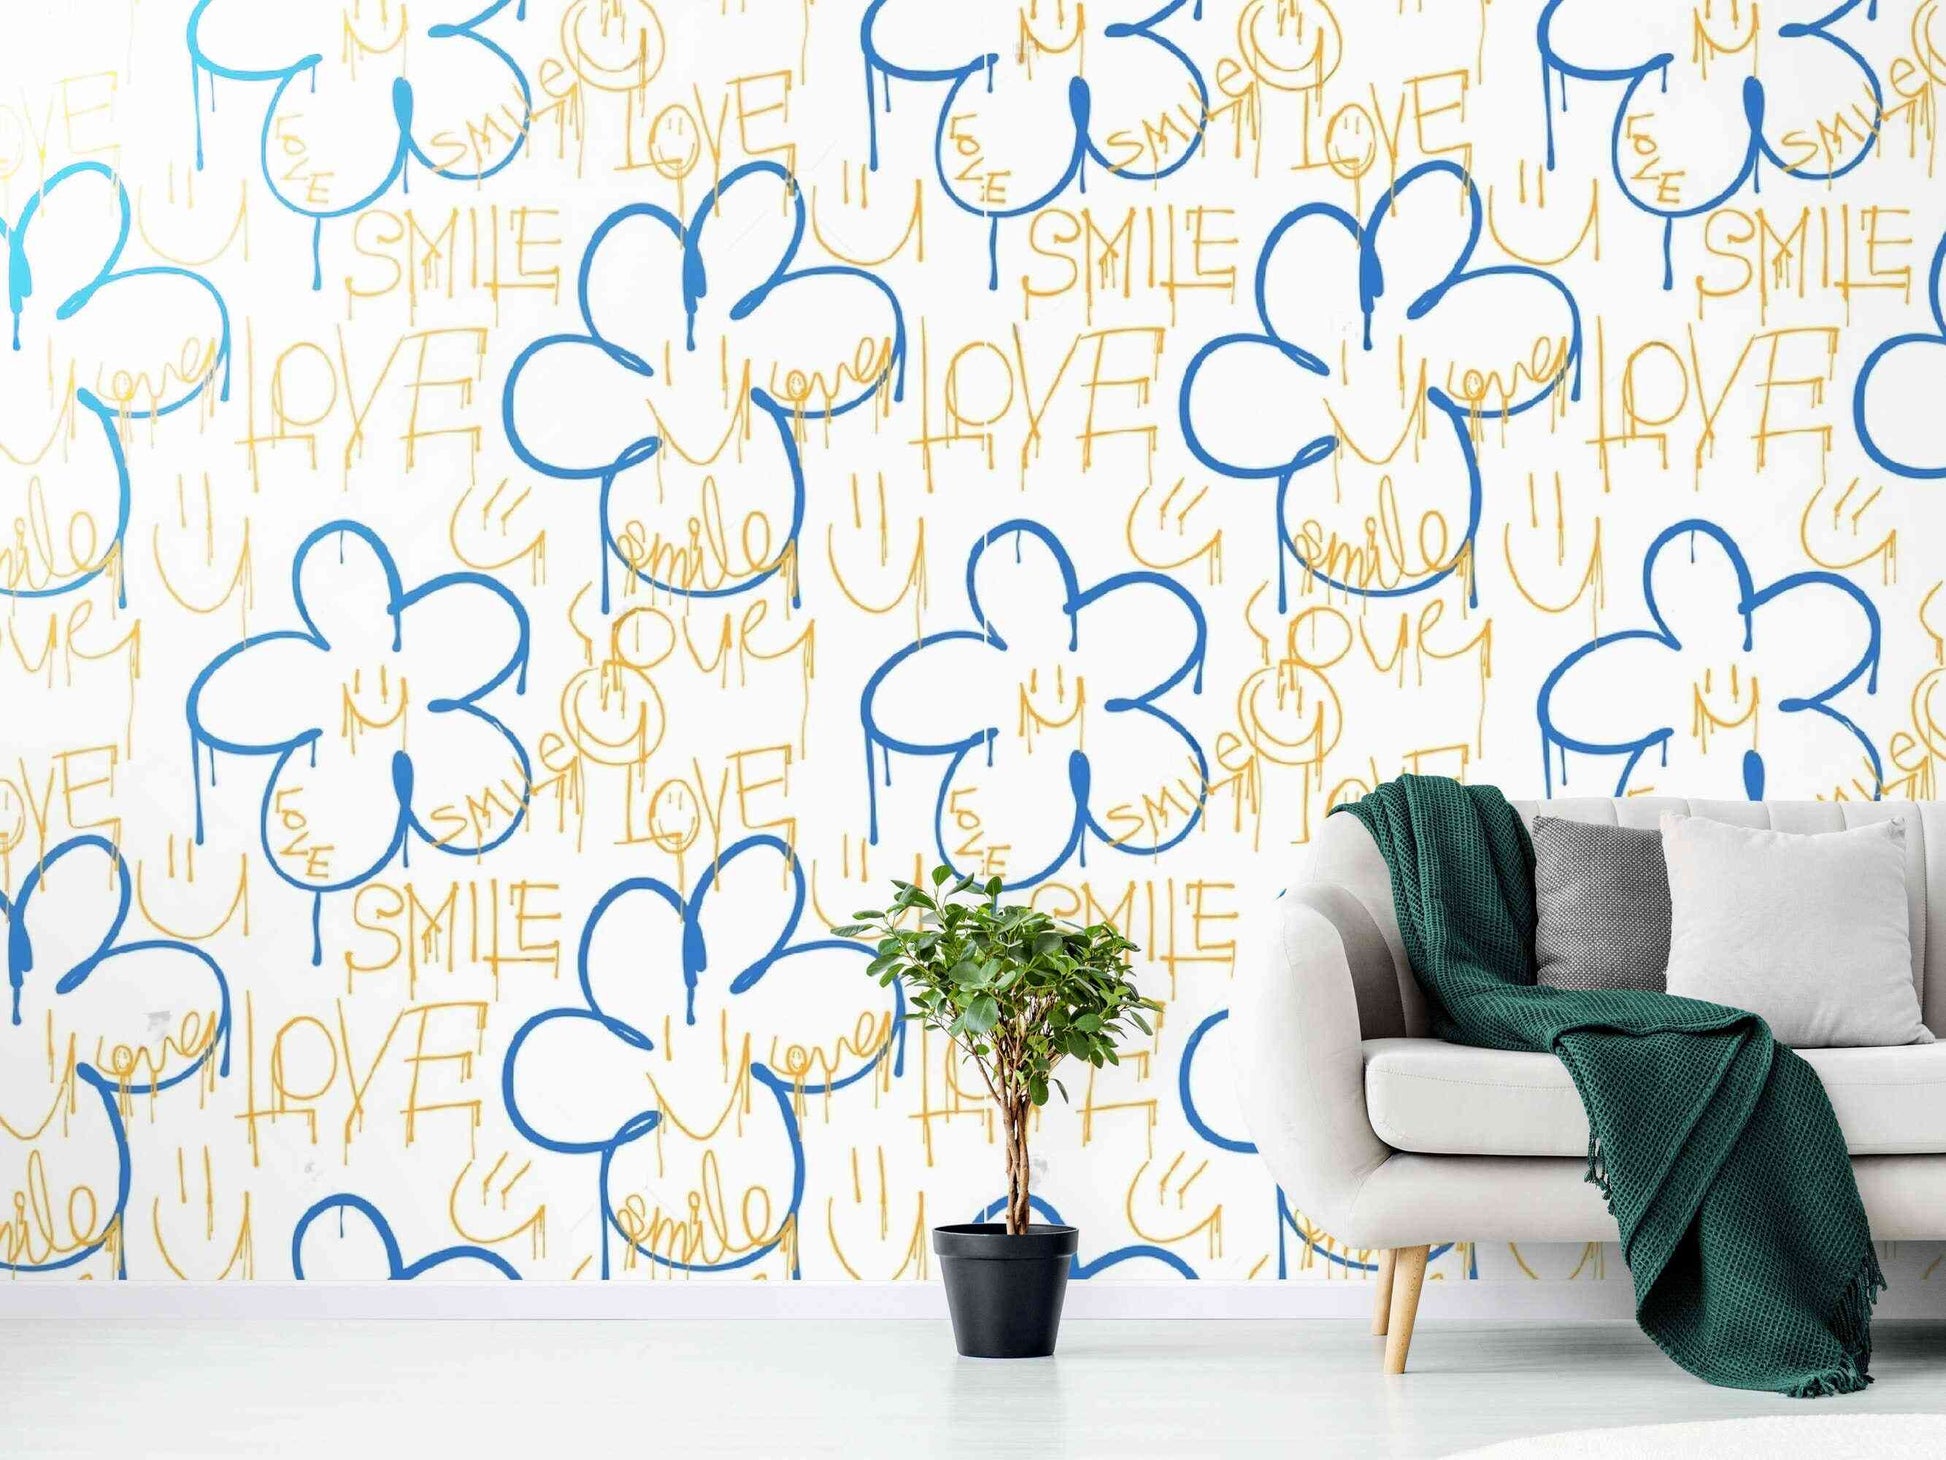 Room showcasing the graffiti wallpaper mural with a floral touch